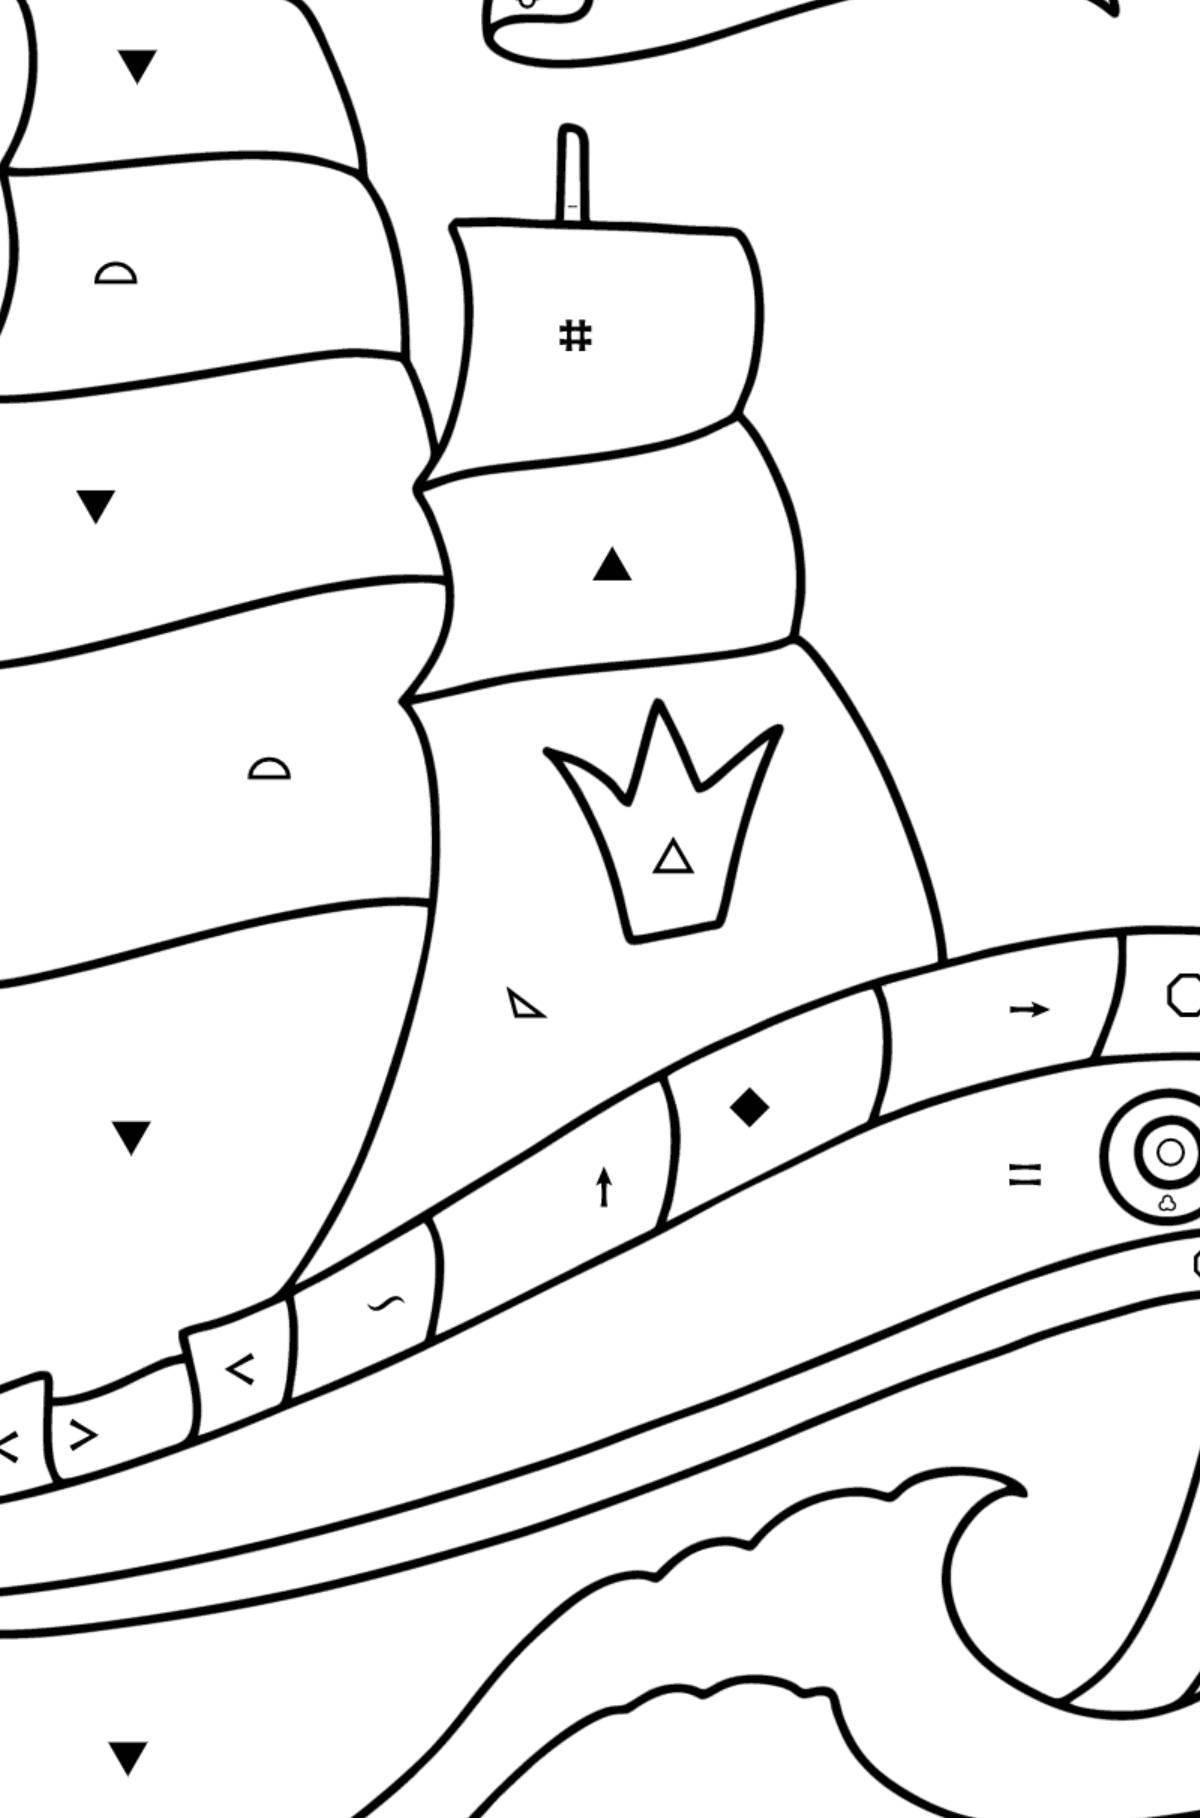 Fun boat coloring for 5-6 year olds